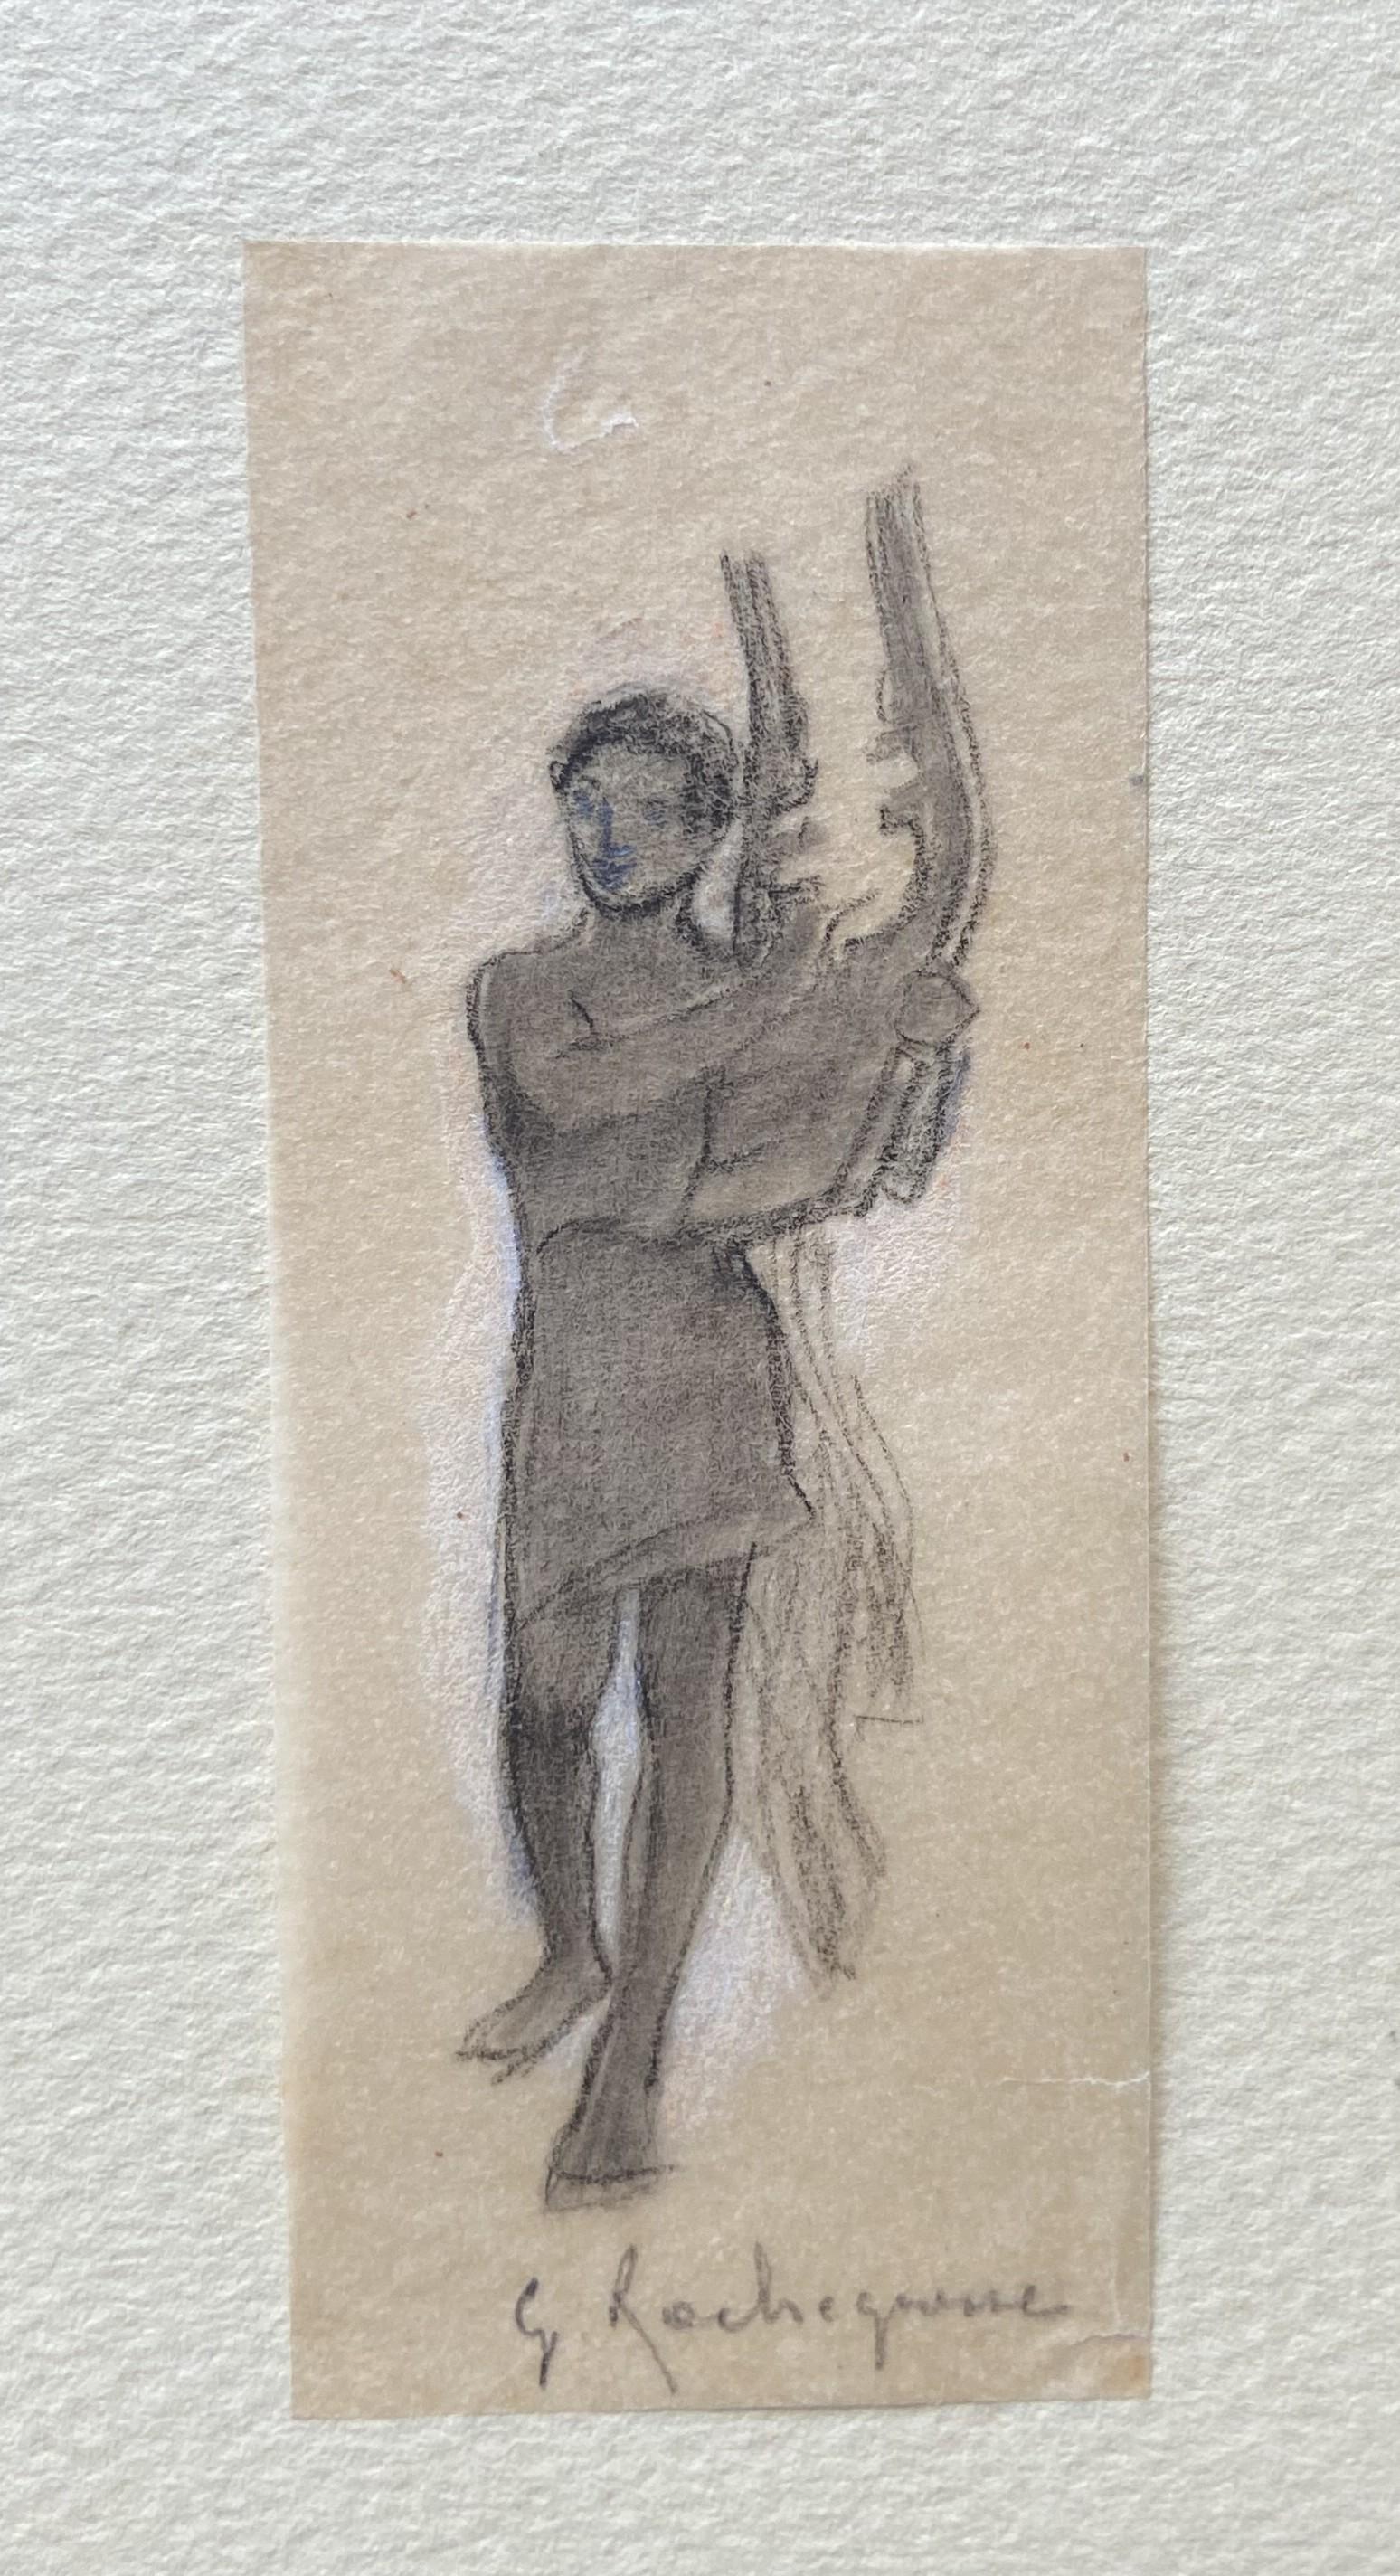 Georges Antoine Rochegrosse  (1859-1938) 
A zither player
carbon pencil on thin paper
8.5 x 3.3 cm
In good condition
Framed : 35 x 24 cm
Provenance: Estate of the artist and by Inheritance to the former owner

This tiny drawing is like a concentrate